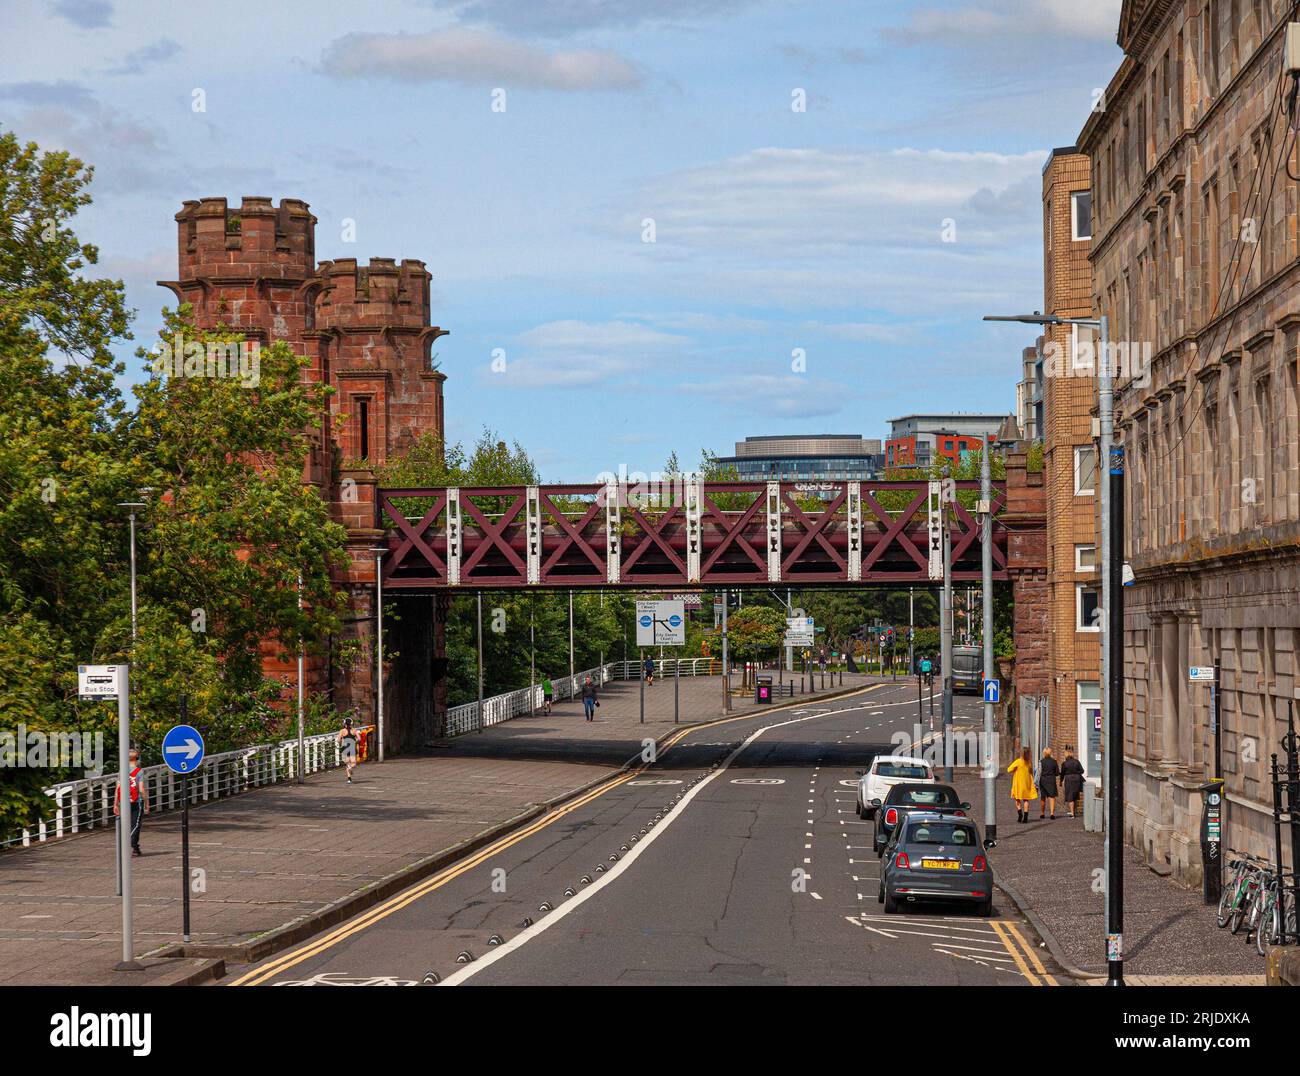 View along Clyde Street in Glasgow, Scotland, showing the approach span of the Caledonian Railway Bridge, which takes trains into Central Station. Stock Photo